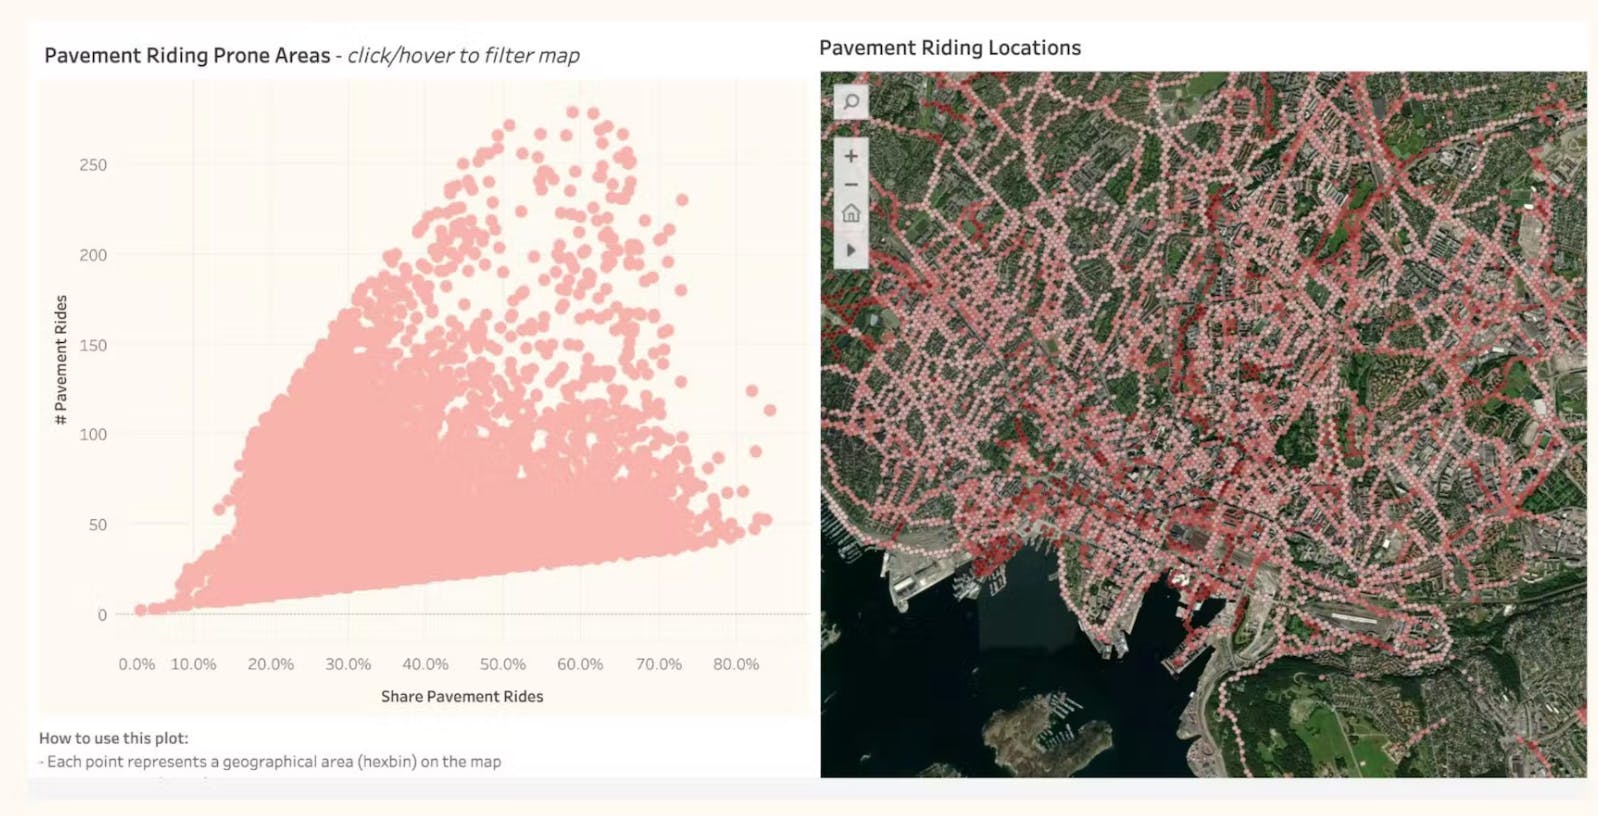 Voi uses their analyses to work with cities on city planning. In the image to the right, the dark red areas are where pavement riding is the most prevalent.